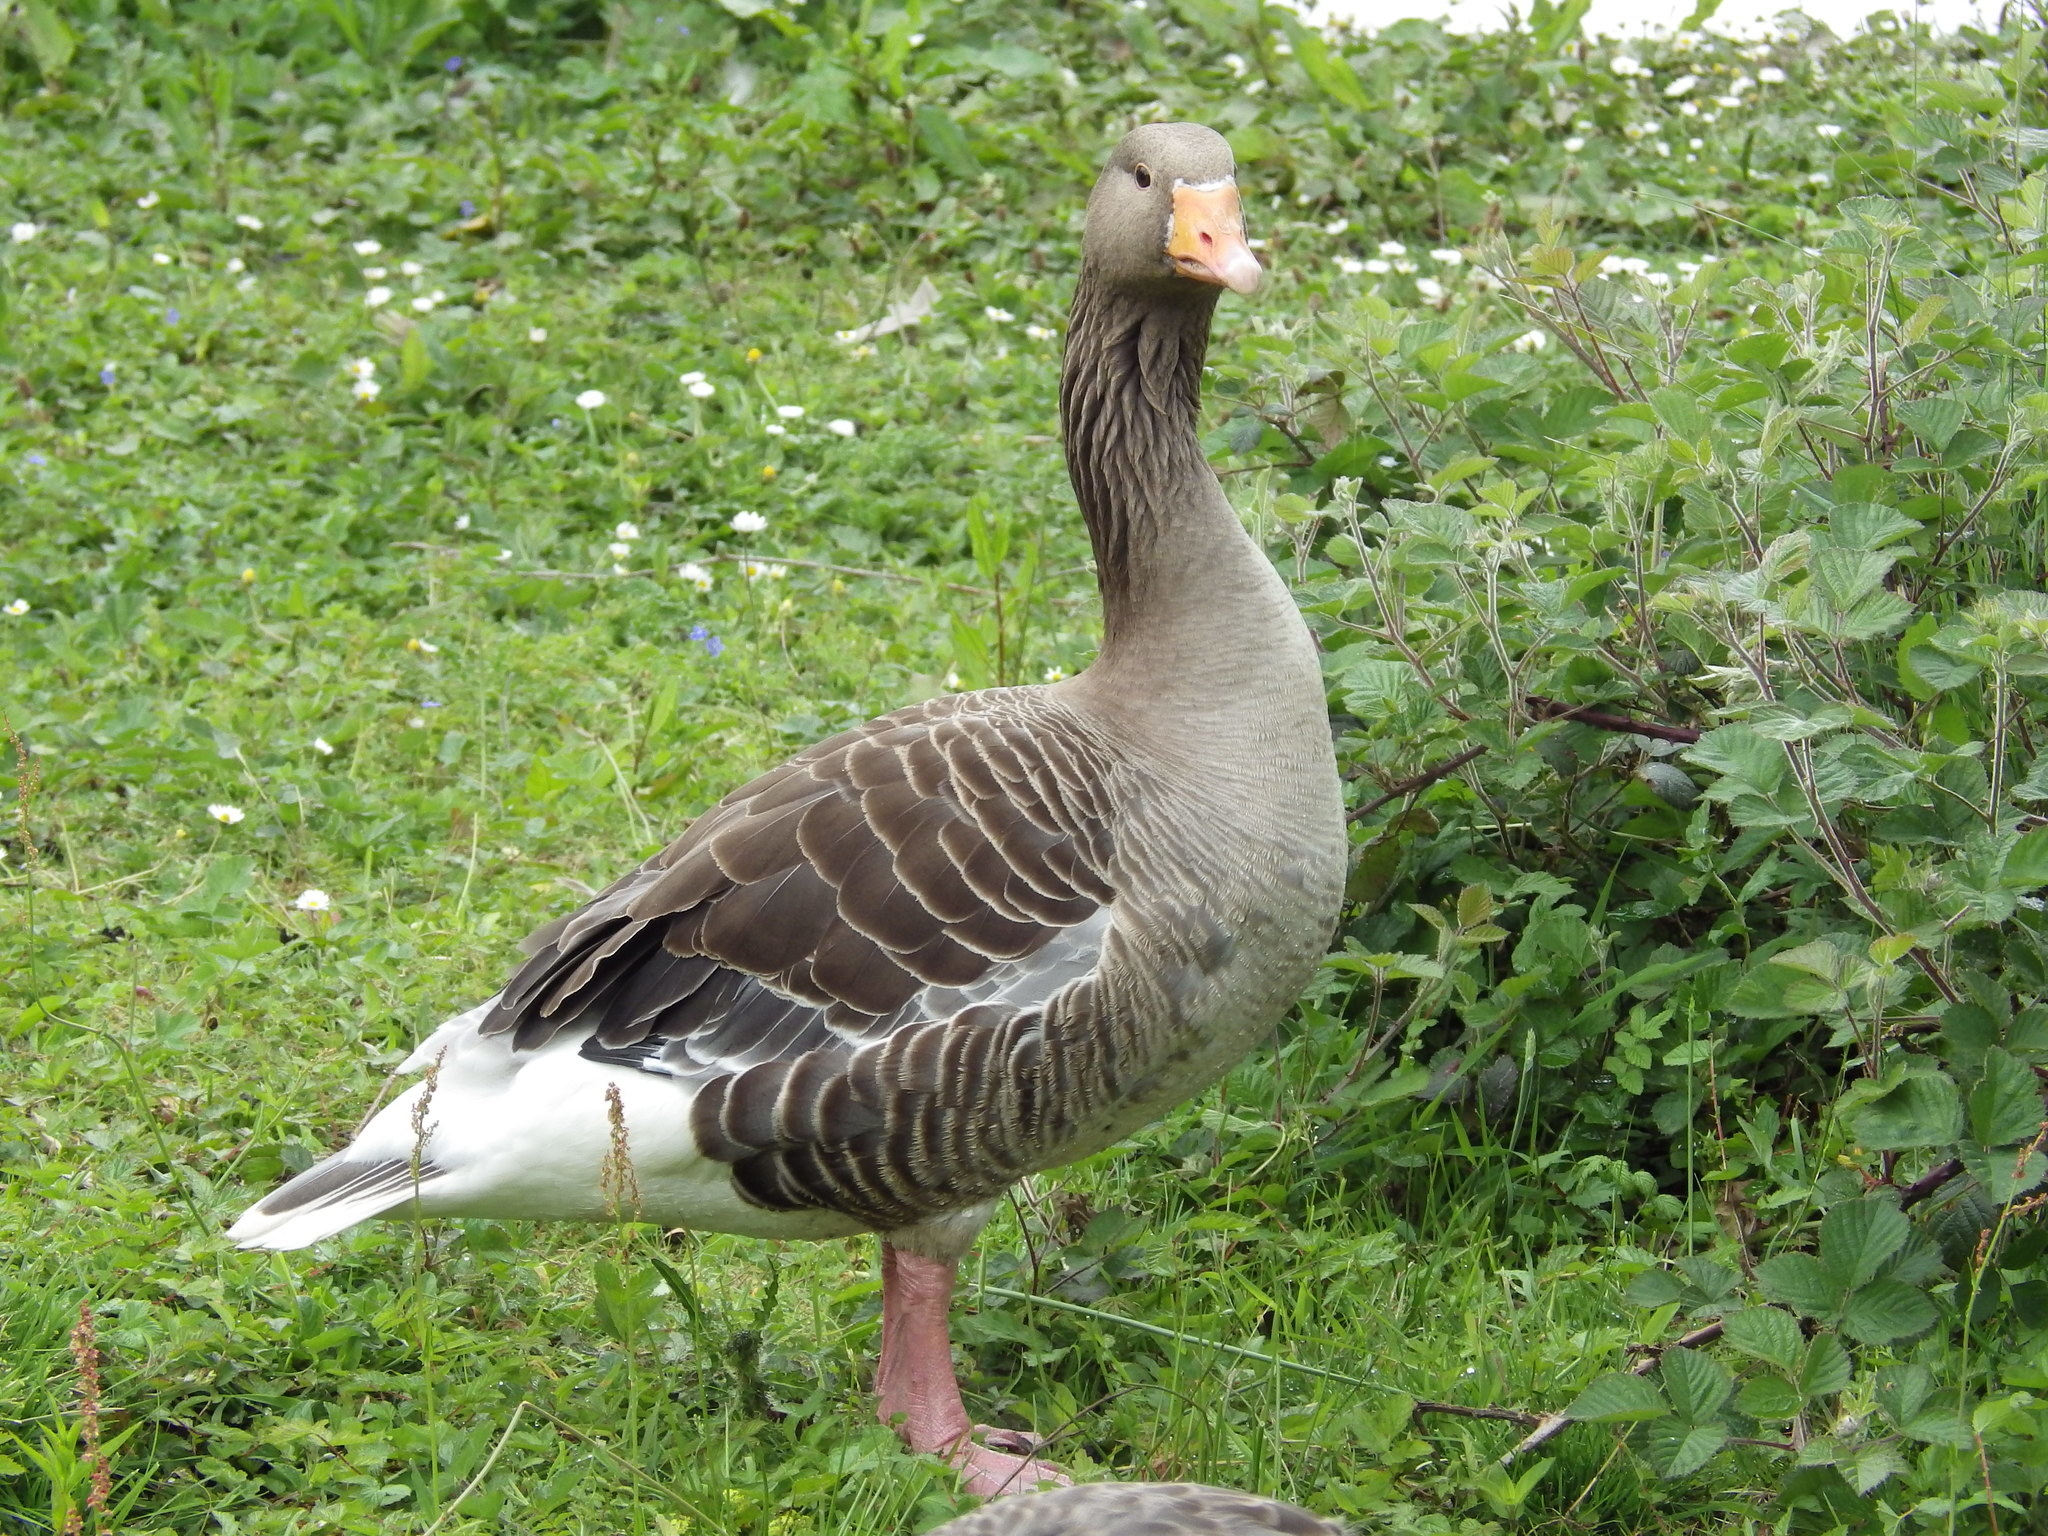 A goose looking menacingly towards the camera while standing in a field of green.